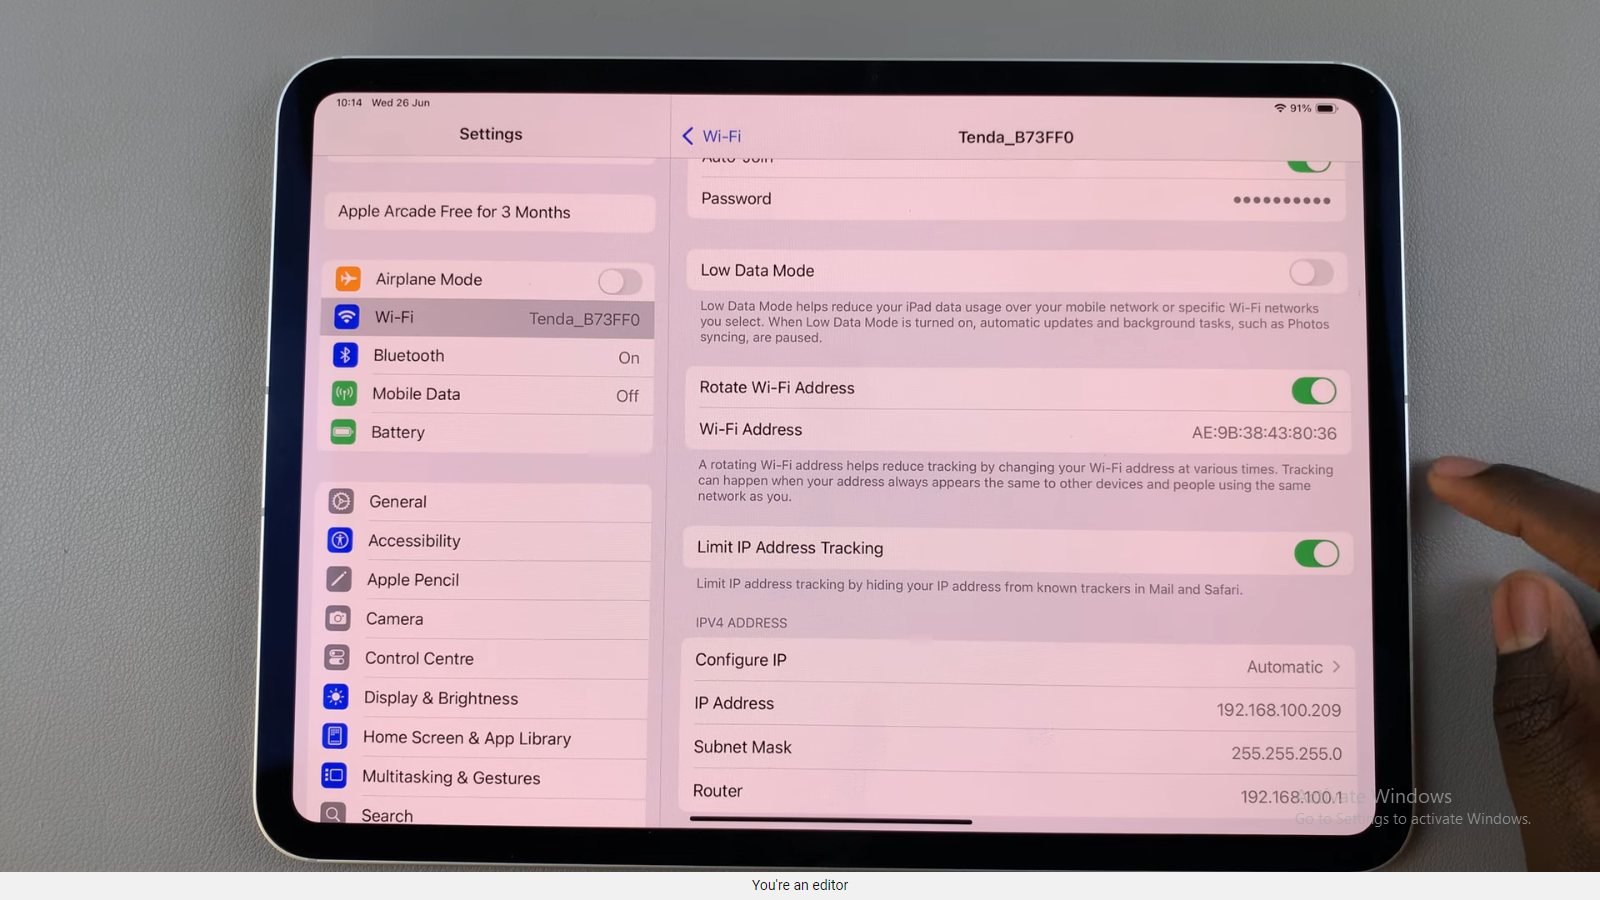 How To Enable Rotate Wi-Fi Address On An iPad